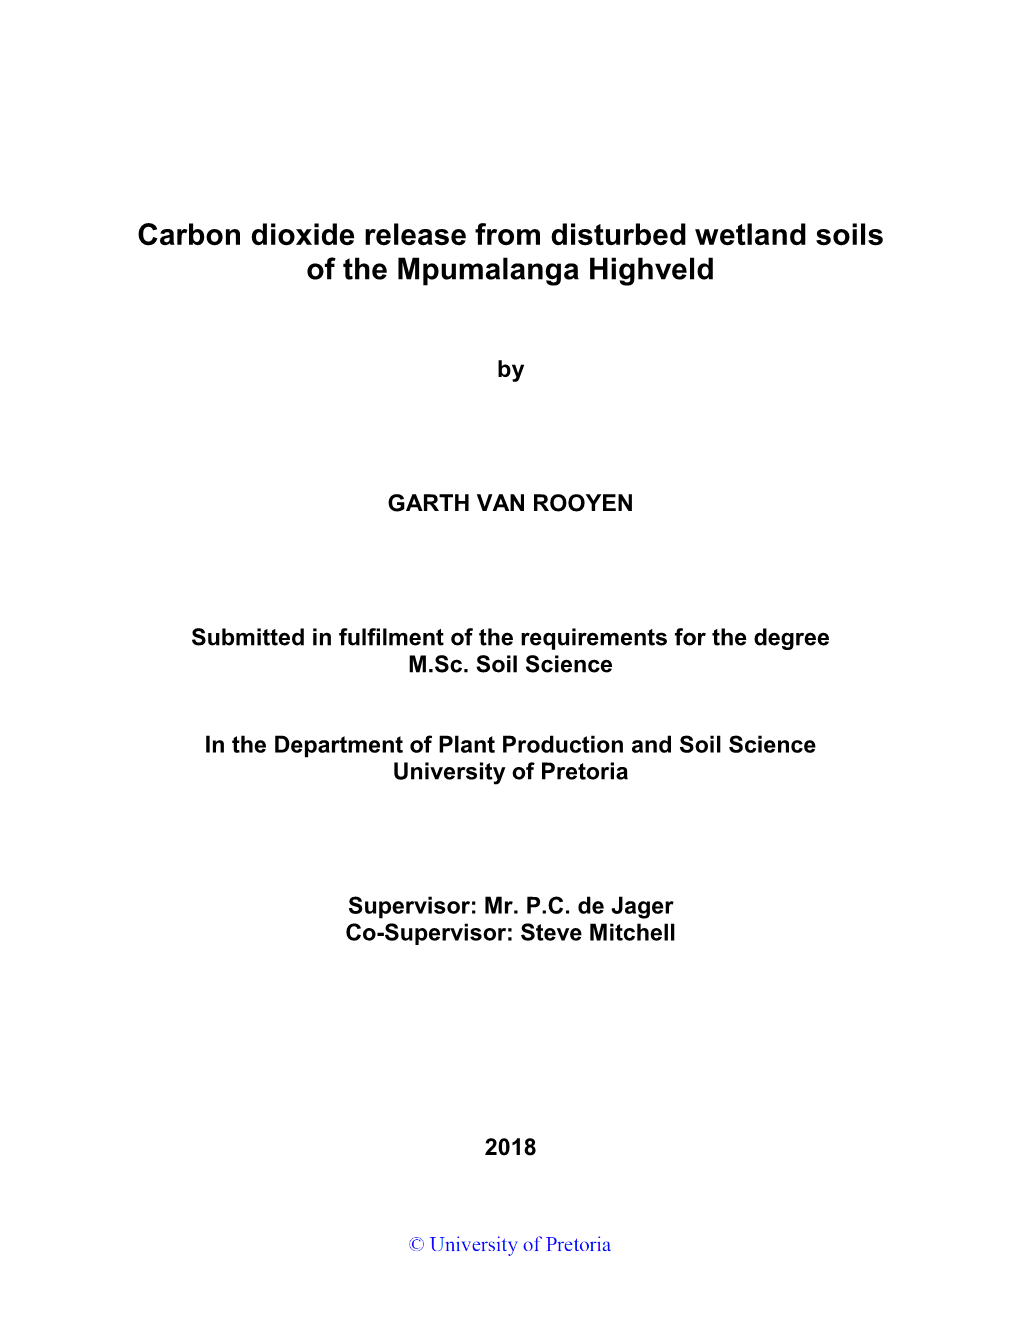 Carbon Dioxide Release from Disturbed Wetland Soils of the Mpumalanga Highveld